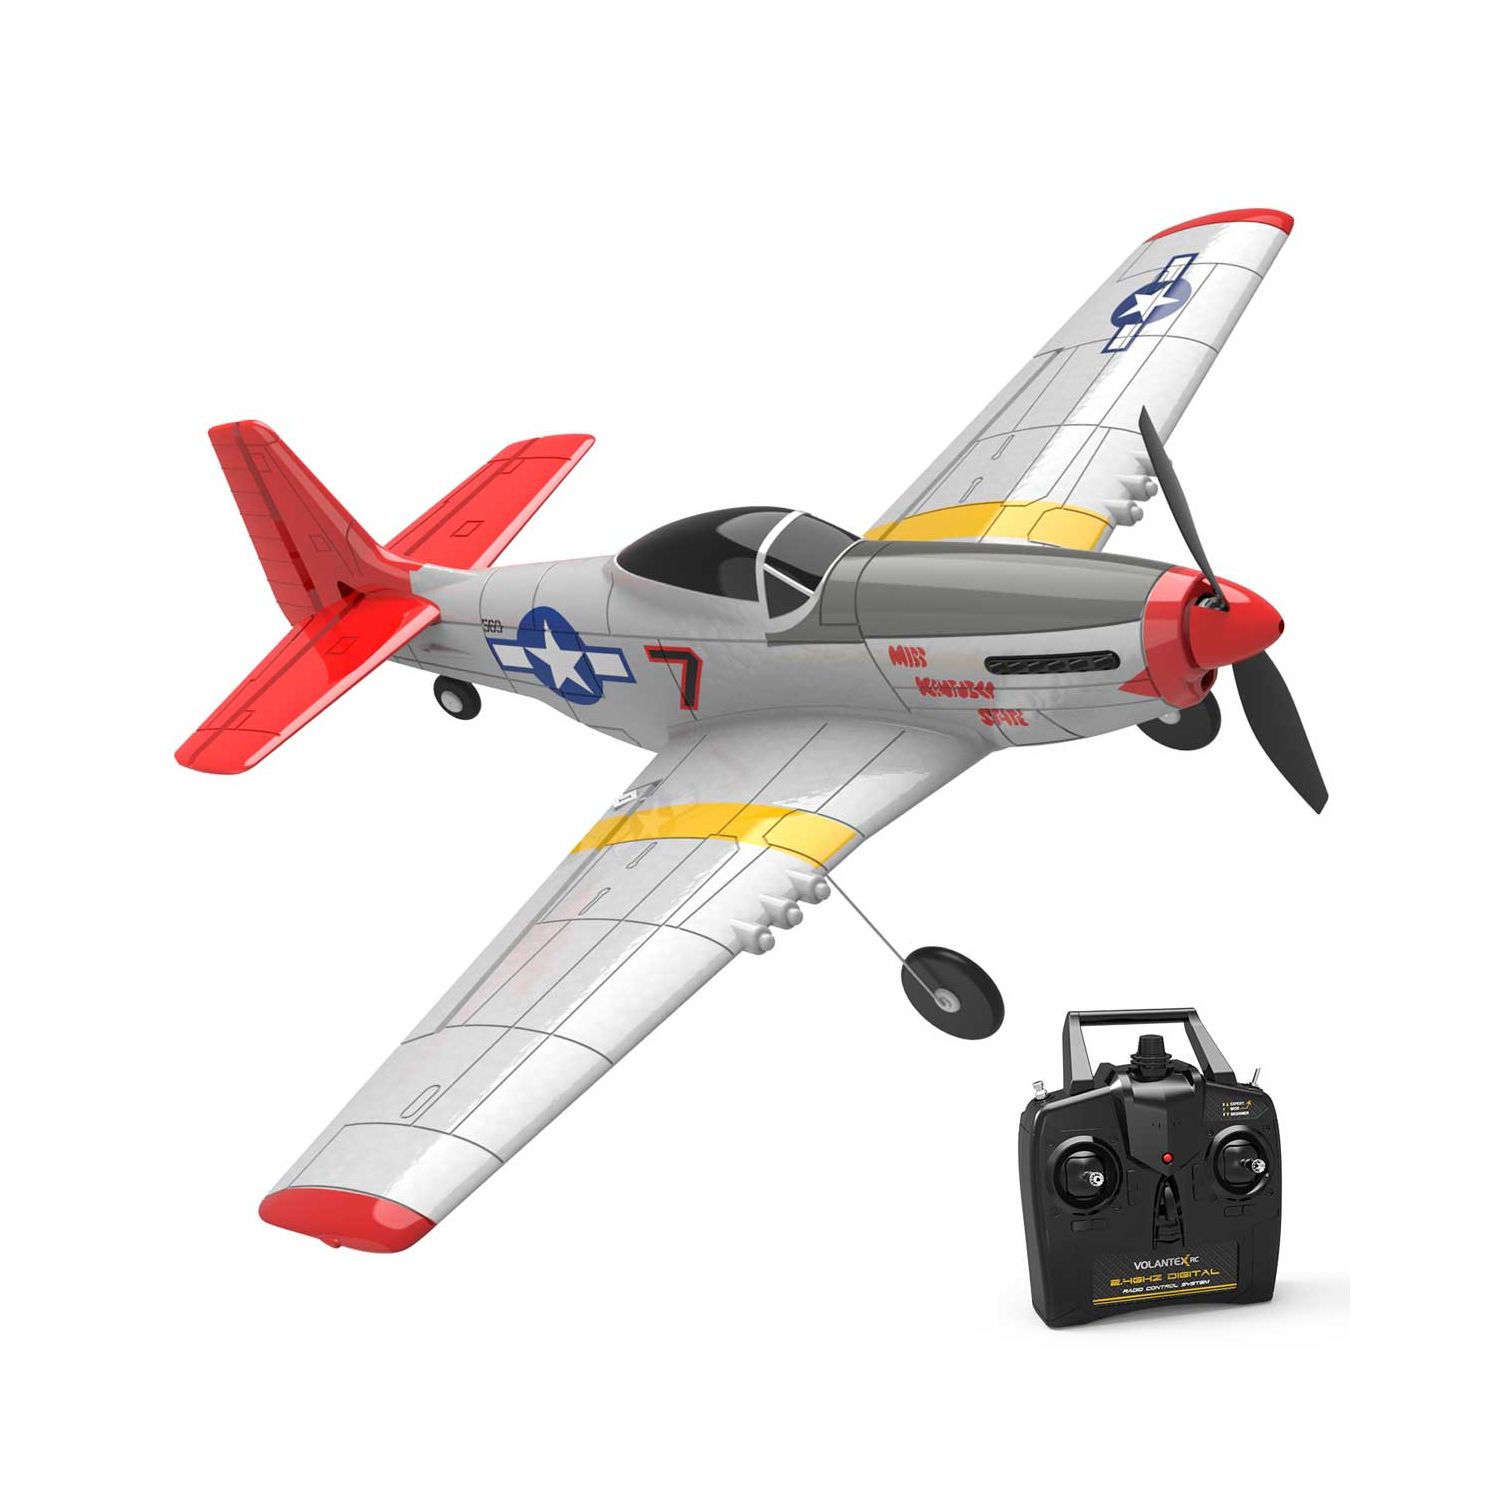 EX-Hobby Mini Mustang P-51D EPP 400mm Wingspan 2.4G 6-Axis Gyro RC Airplane Trainer Fixed Wing RTF One Key Return for Beginner